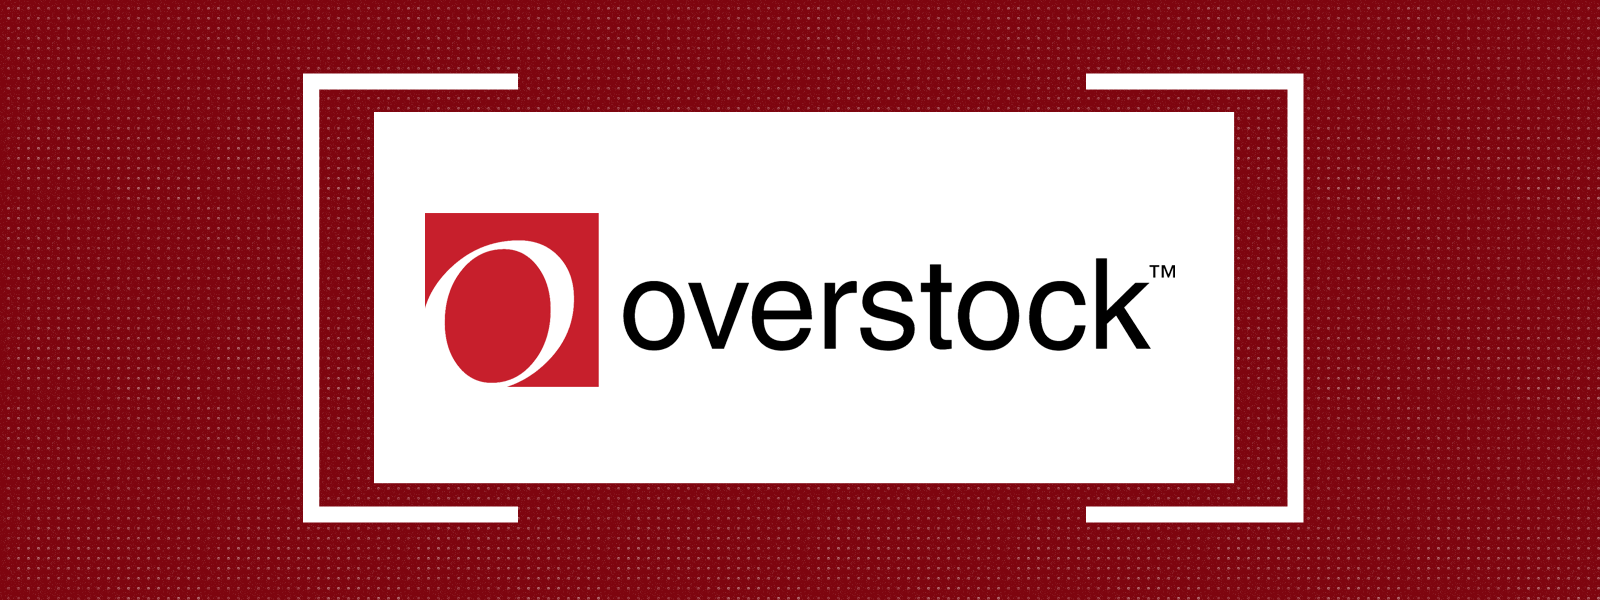 How Do I Sell On Overstock?